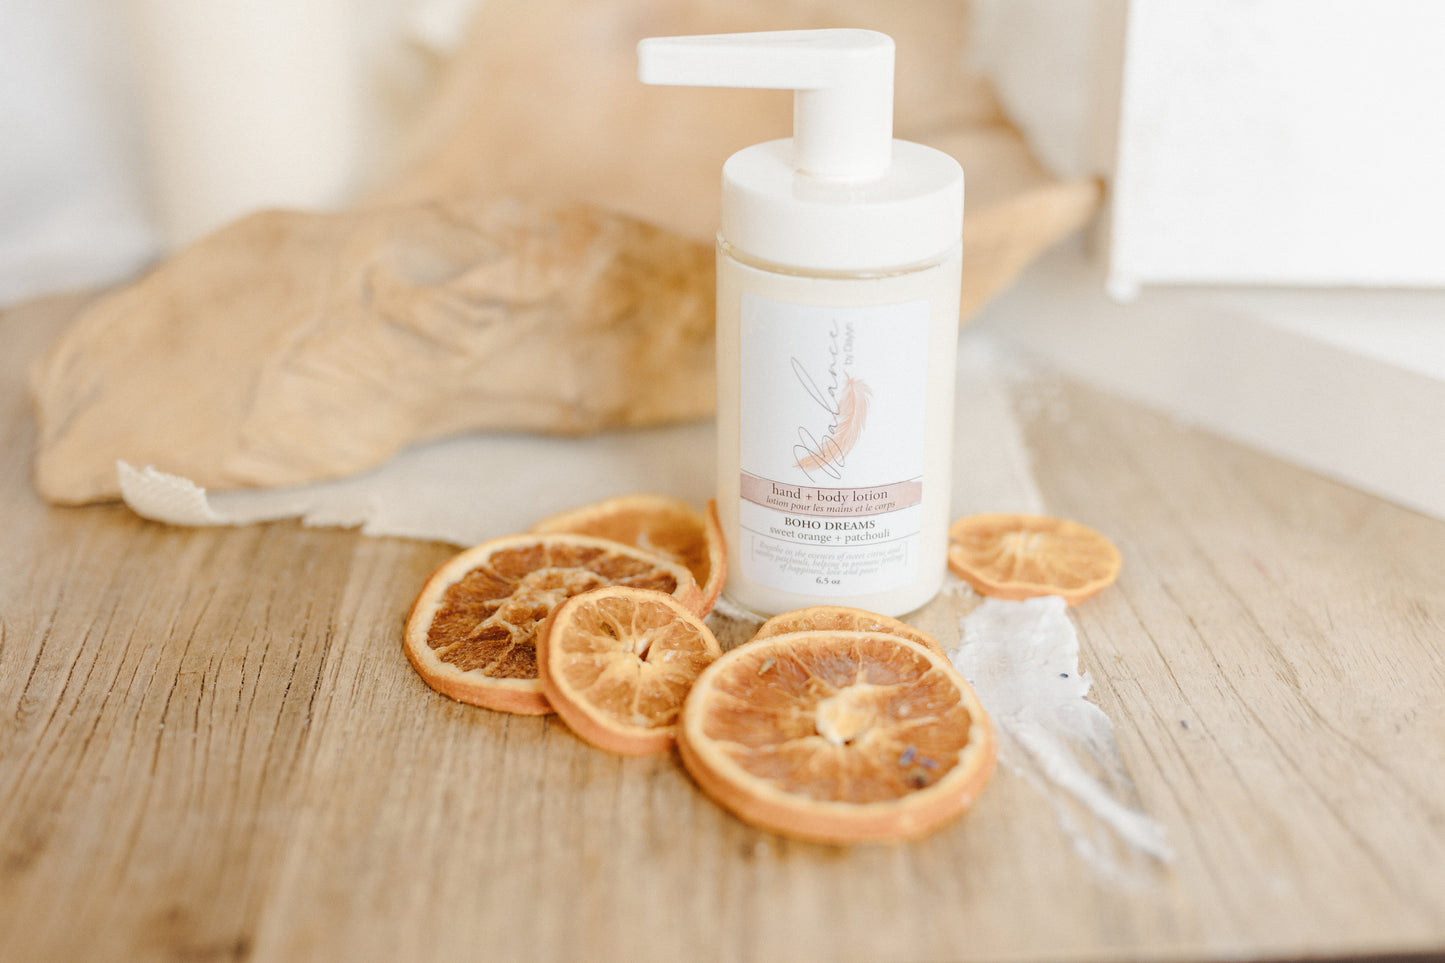 Boho Dreams Sweet Orange and Patchouli Hand and Body Lotion